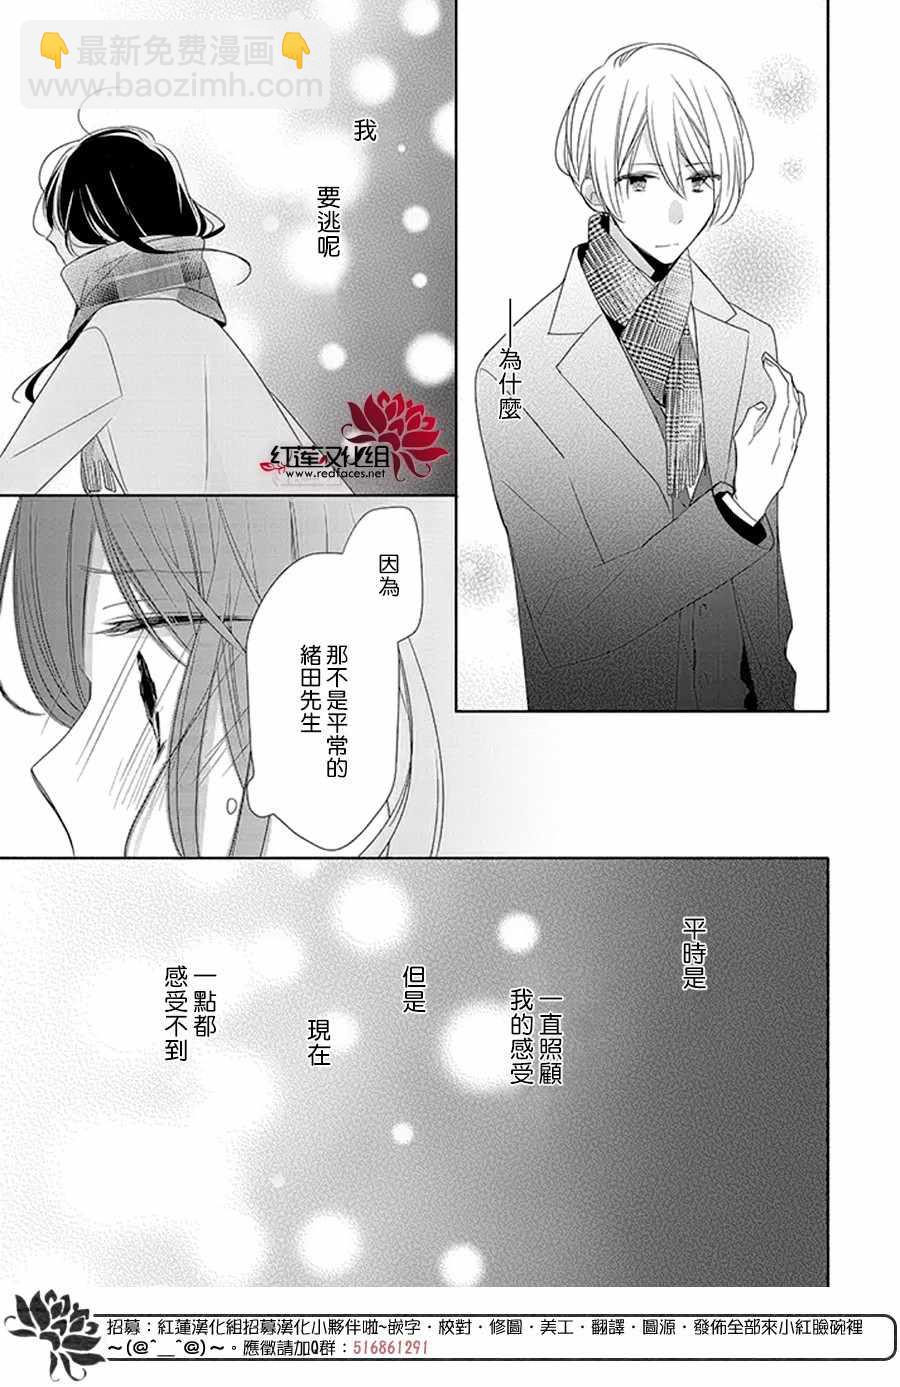 If given a second chance - 18话 - 4